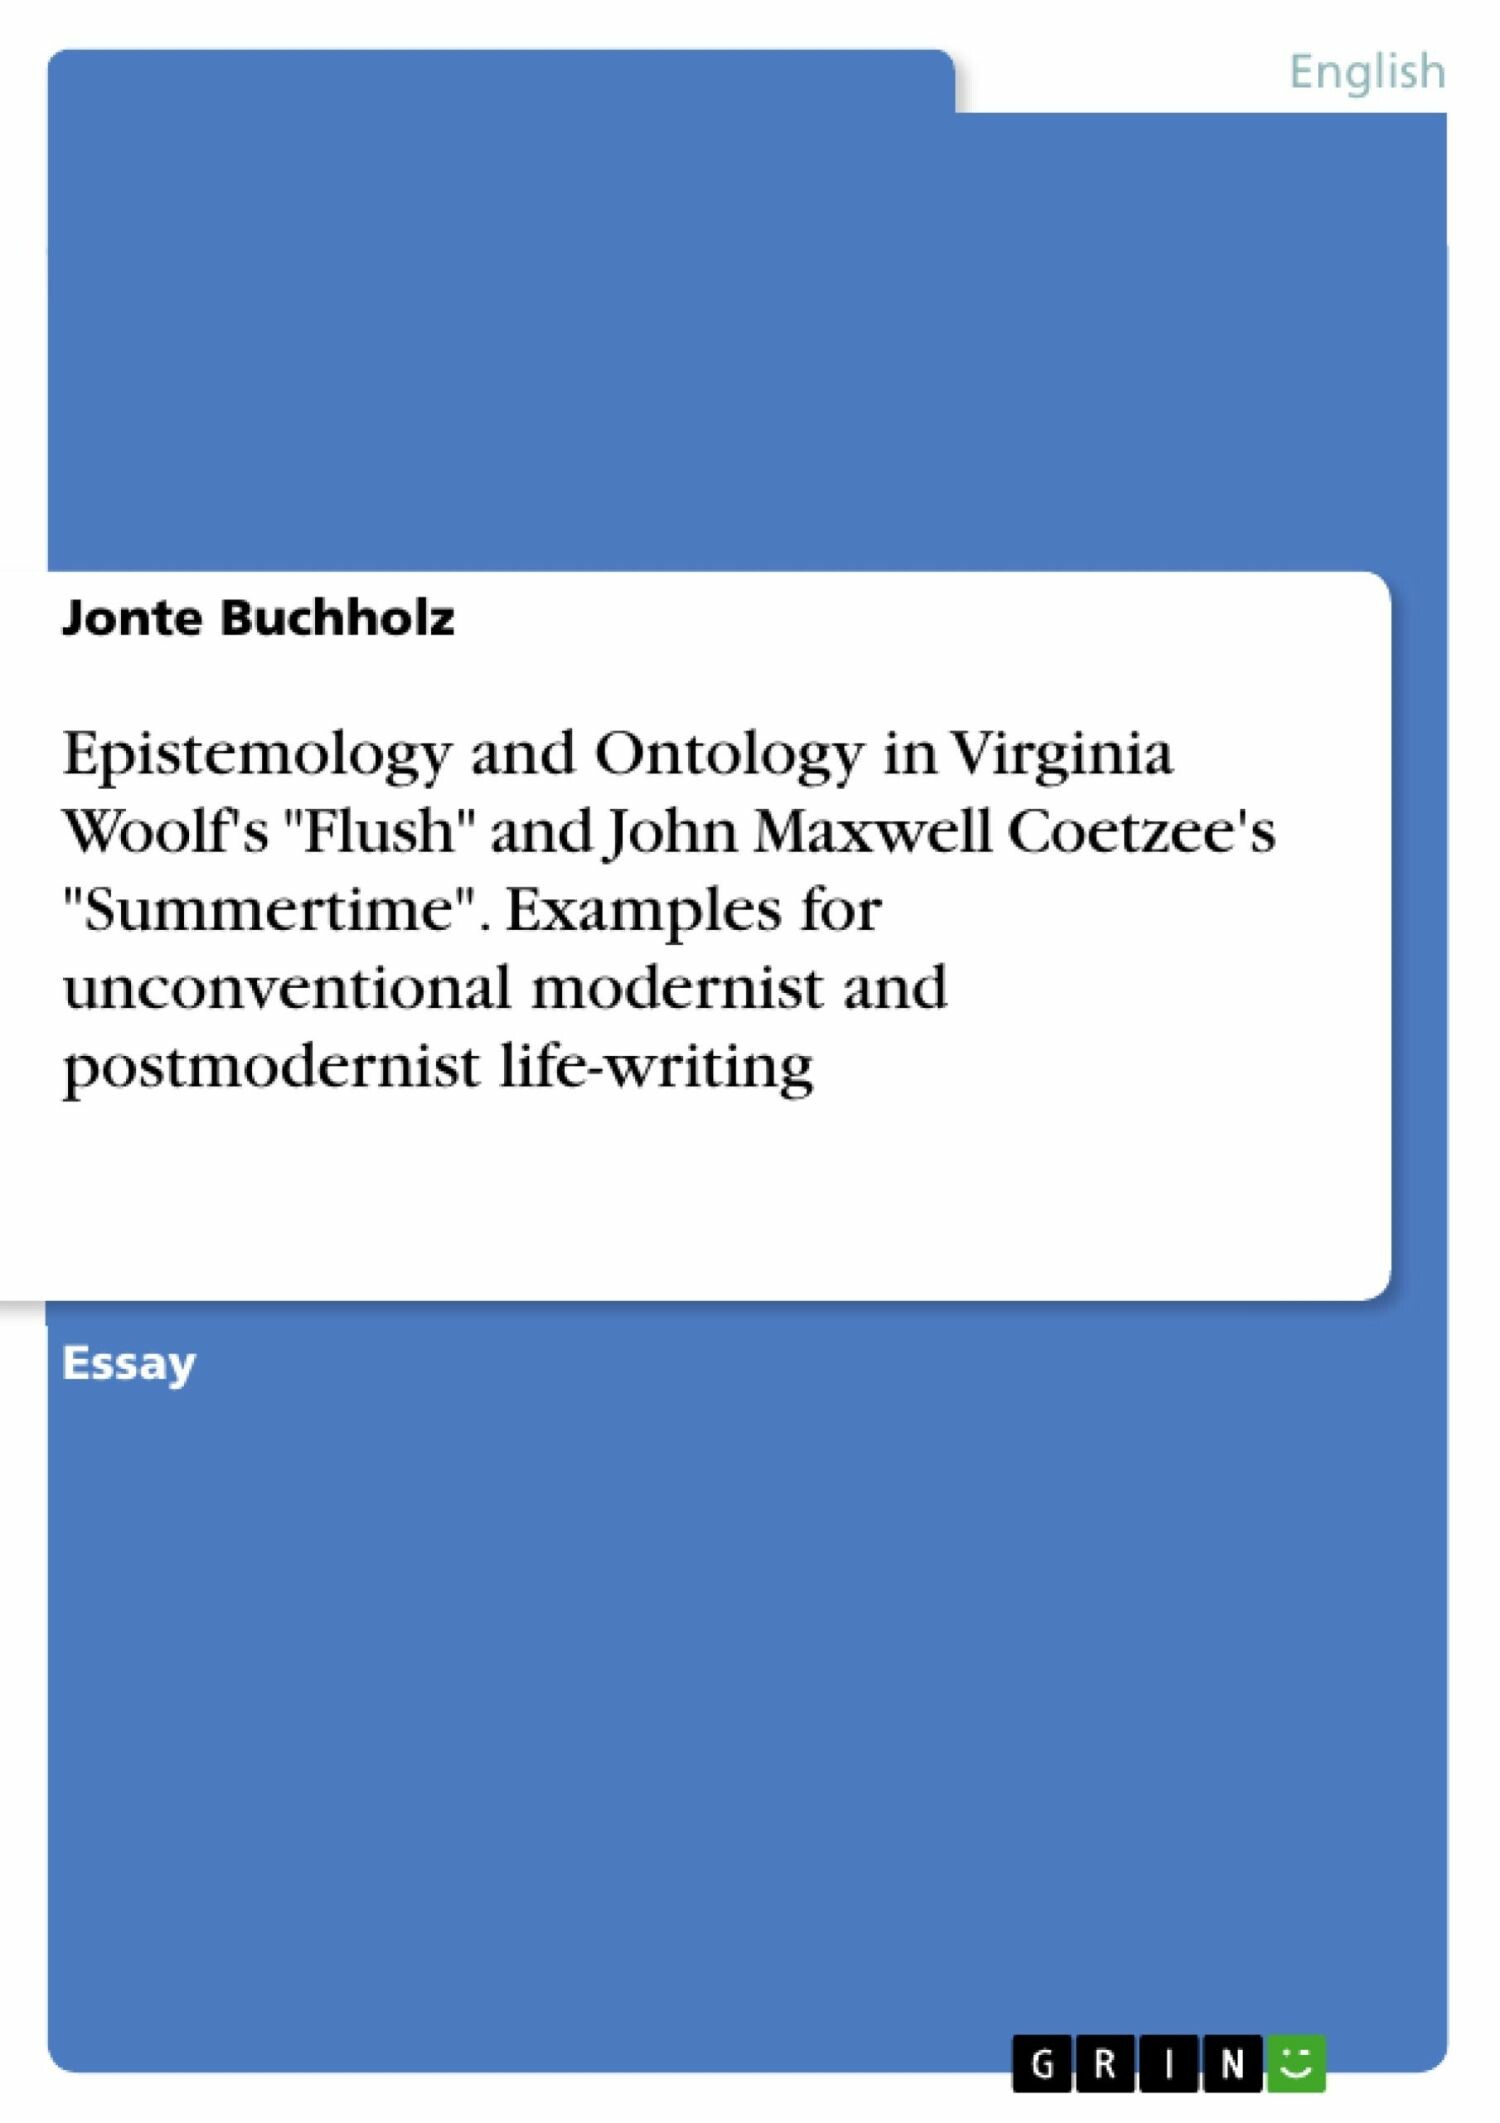 Epistemology and Ontology in Virginia Woolf's 'Flush' and John Maxwell Coetzee's 'Summertime'. Examples for unconventional modernist and postmodernist life-writing